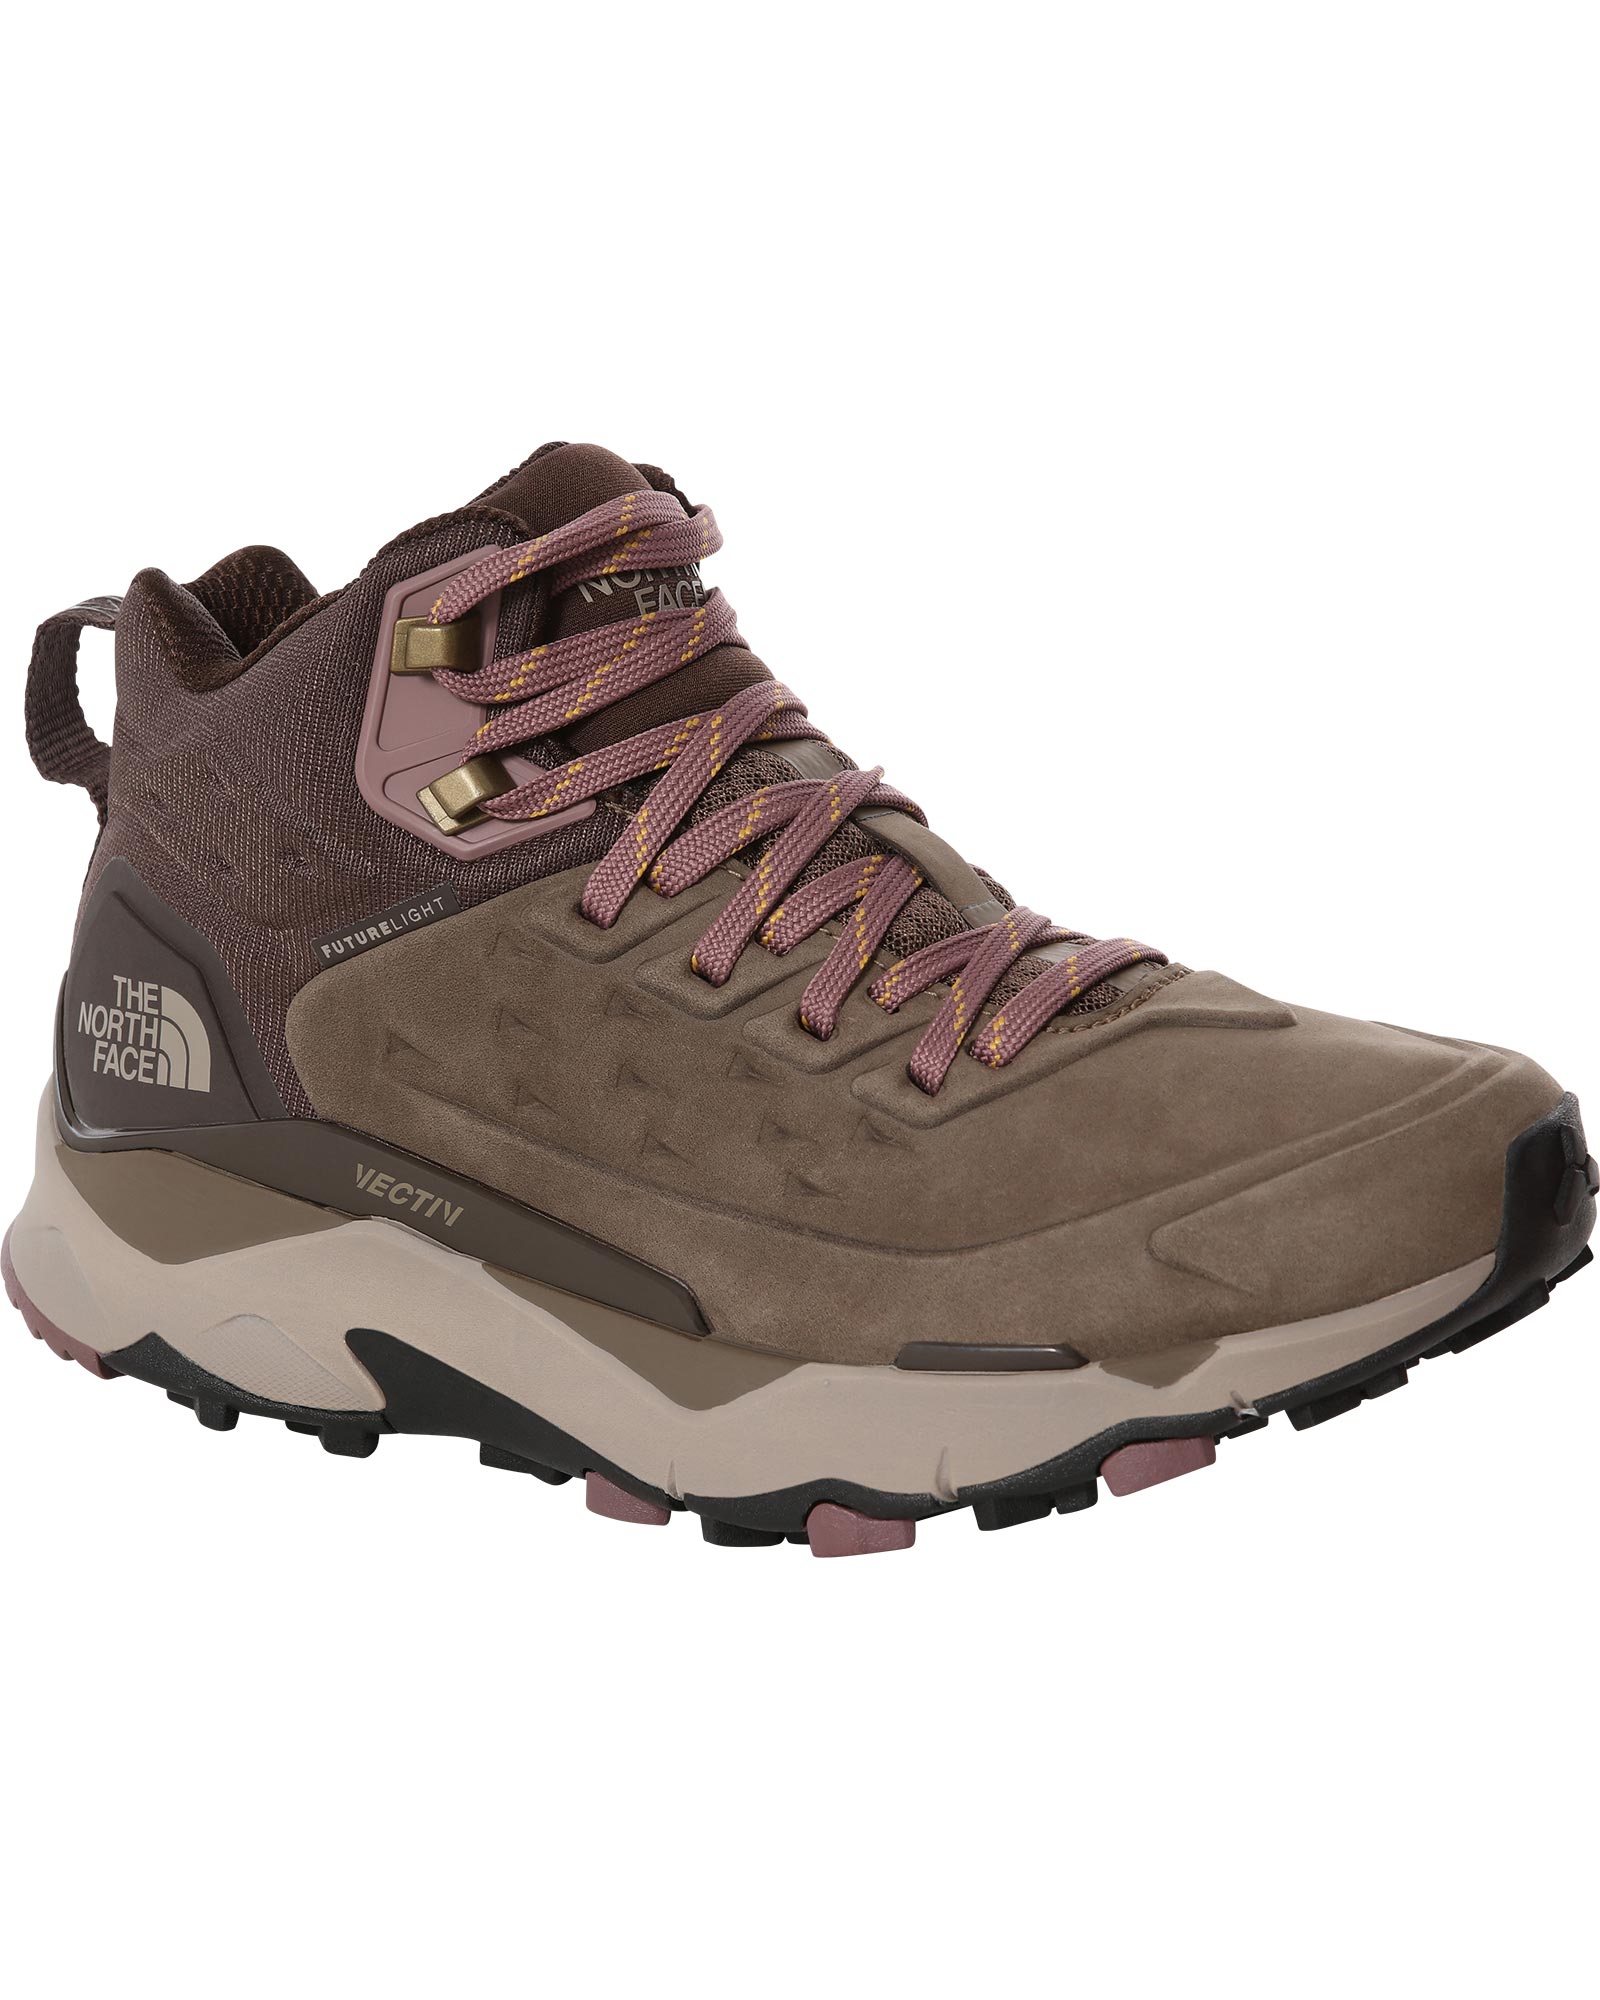 The North Face Vectiv Exploris Leather Mid FUTURELIGHT Women’s Boots - Bipartisan Brown/Coffee Brown UK 4